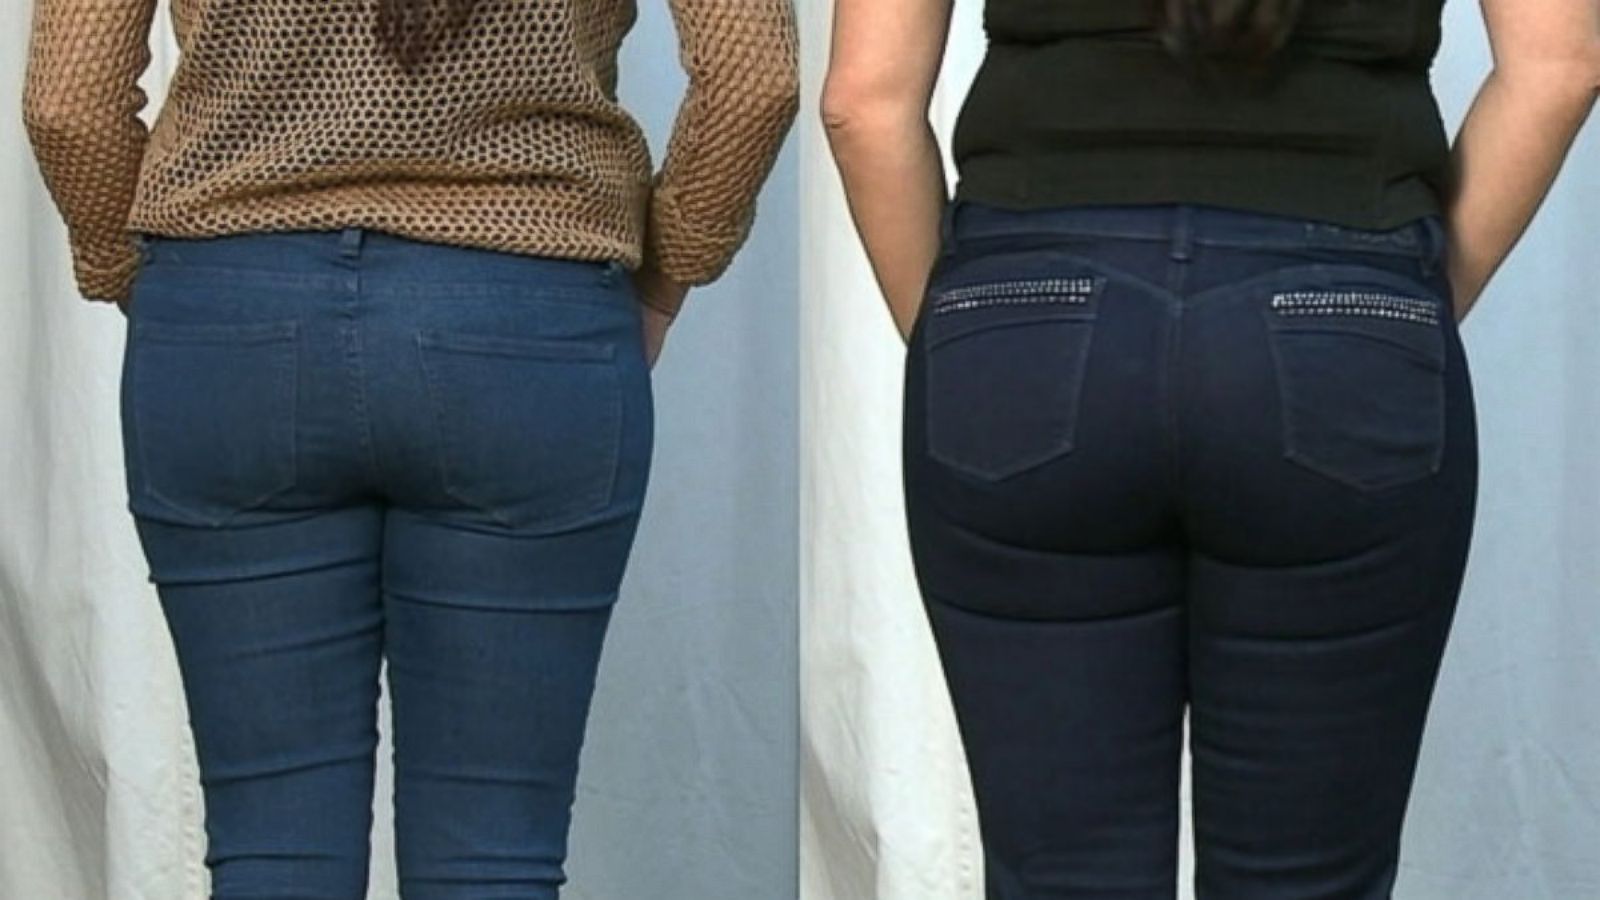 Push-up Jeans